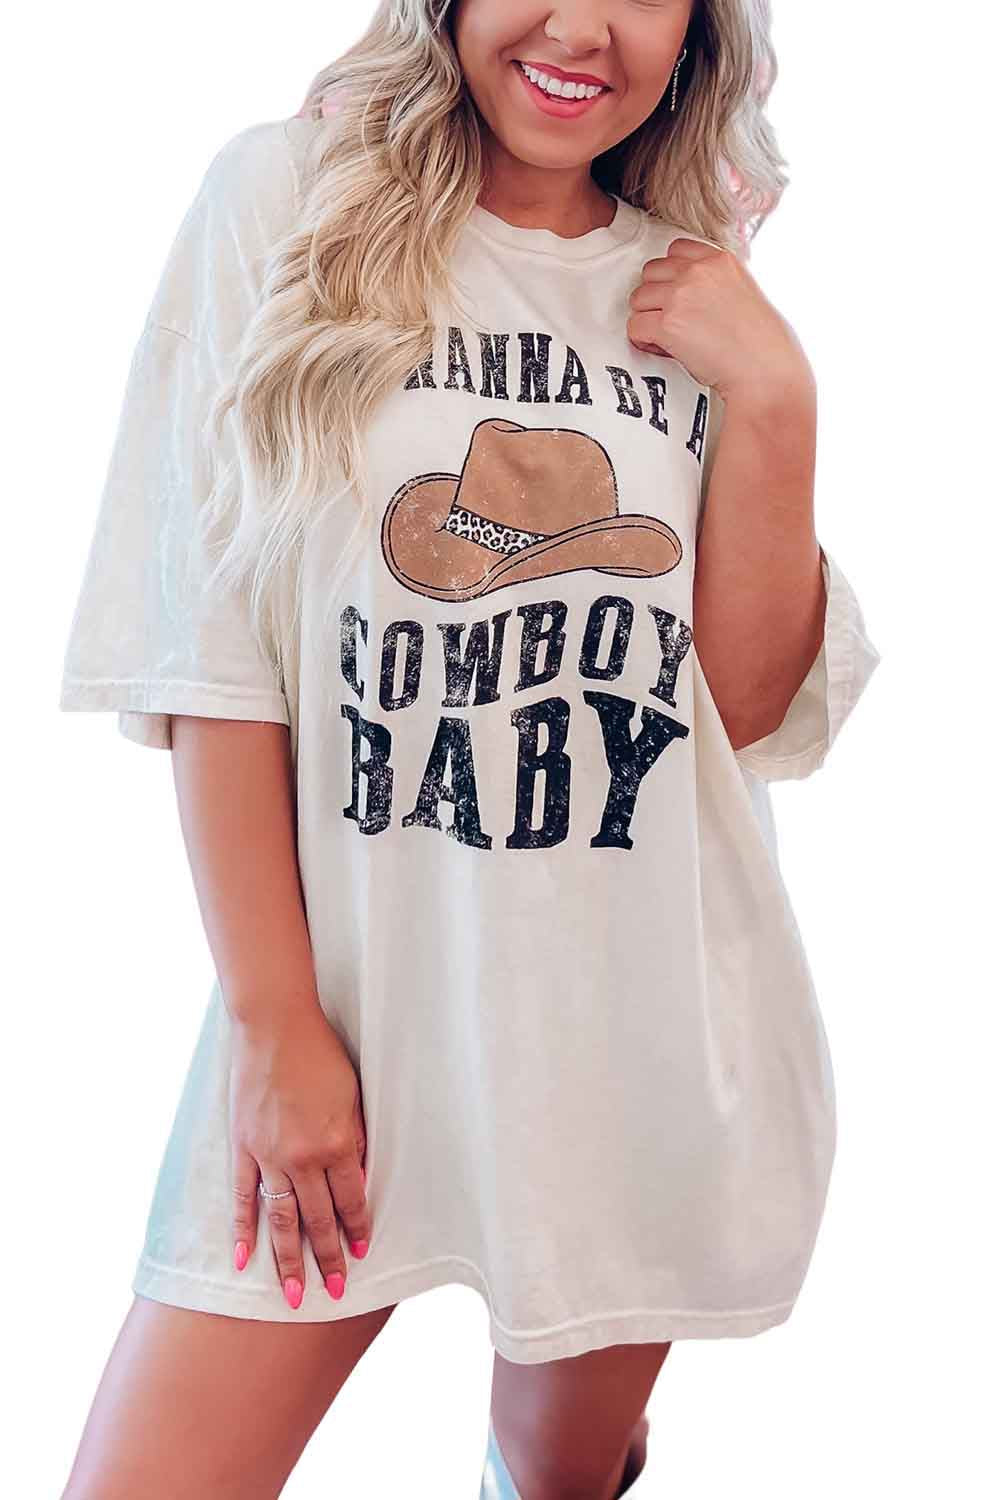 Beige I WANNA BE A COWBOY Western Graphic Oversized Tee